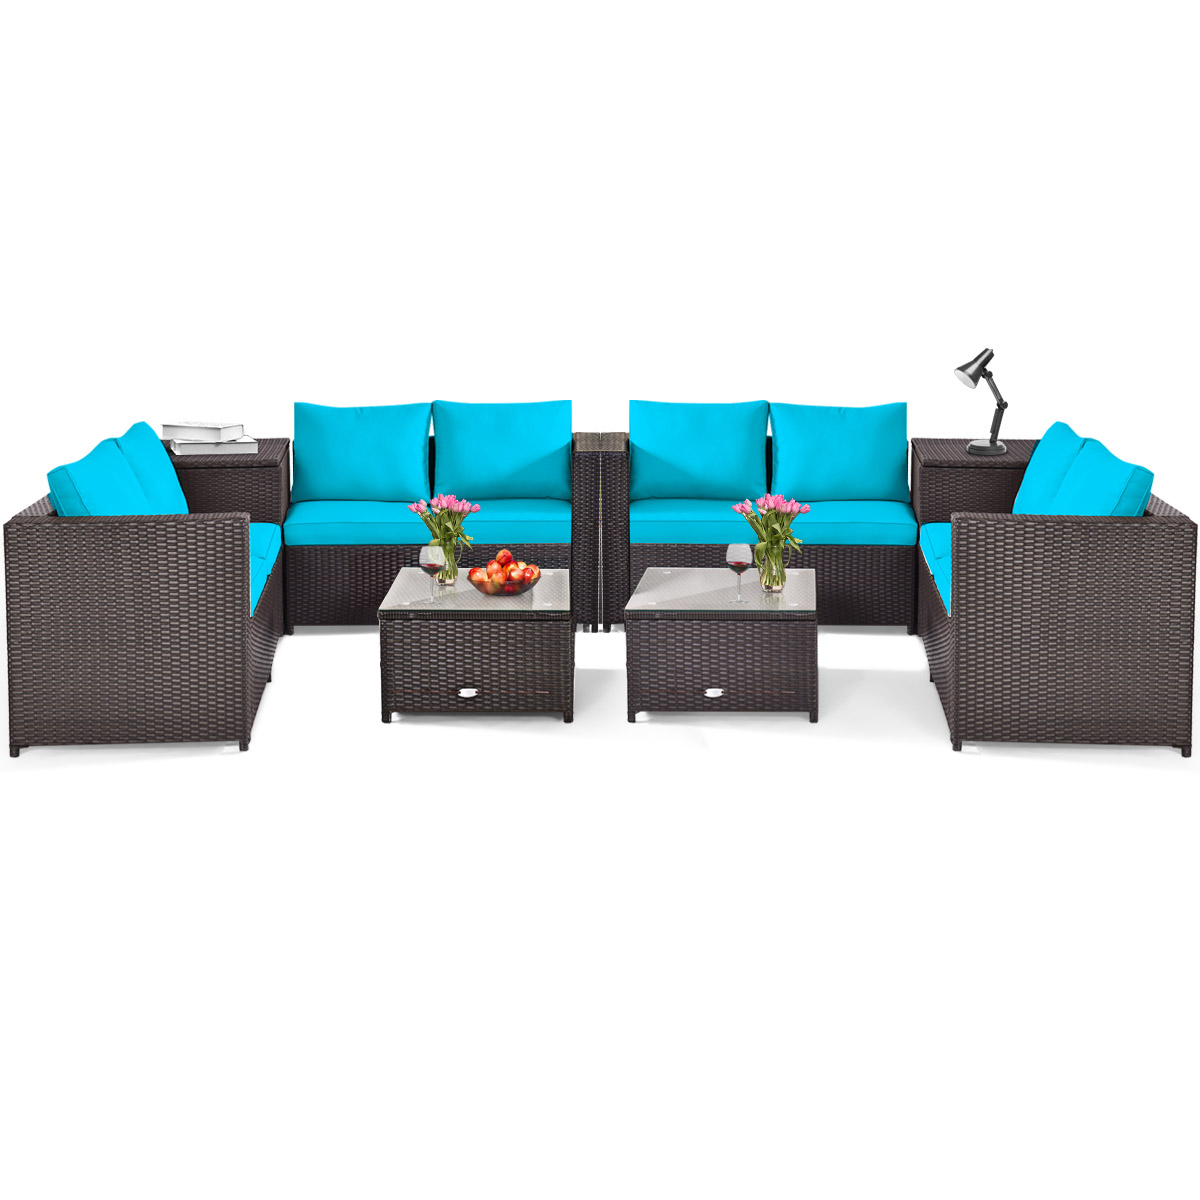 Patiojoy 8-Piece Outdoor Rattan Sectional Loveseat Couch Conversation Sofa Set with Storage Box &Coffee Table Turquoise - image 1 of 6